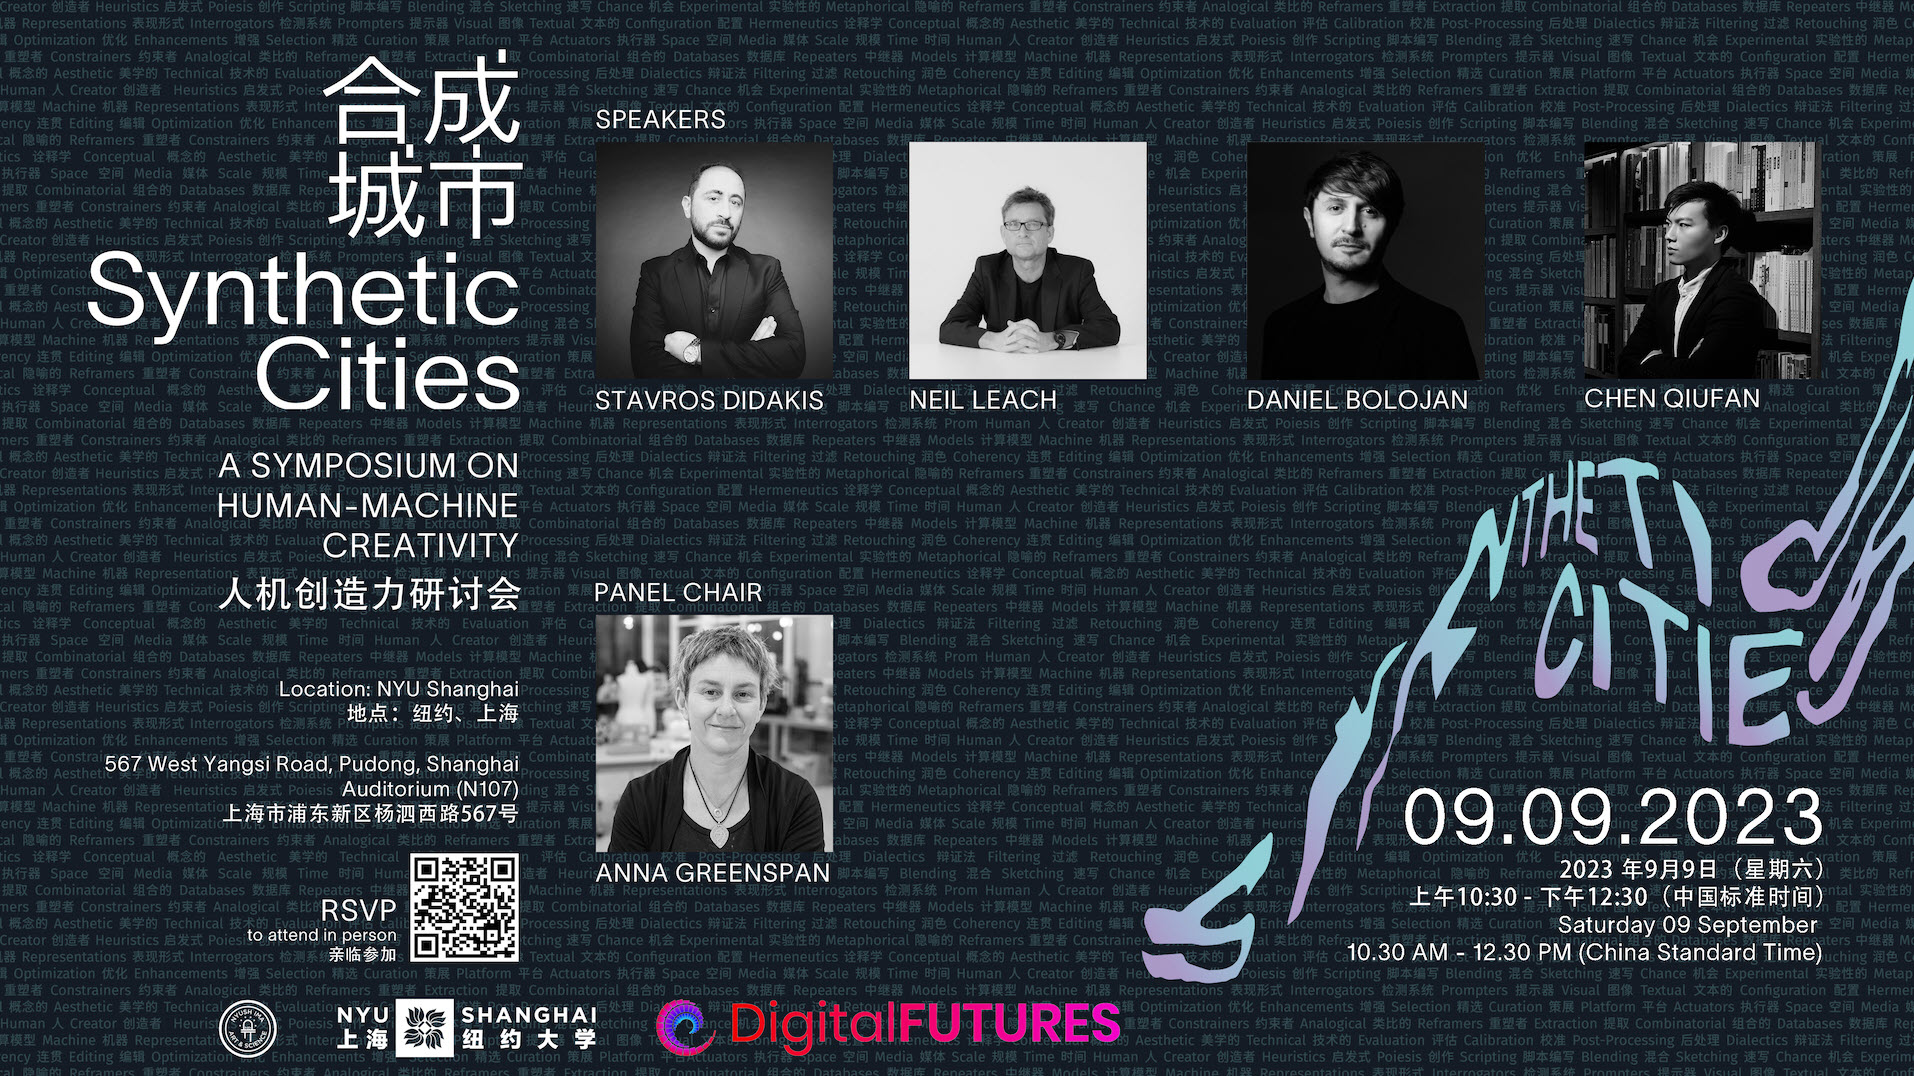  ASSISTANT PROFESSOR, DANIEL BOLOJAN WILL DELIVER A LECTURE AT NYU Shanghai | Synthetic Cities: A Symposium on Human-Machine Creativity